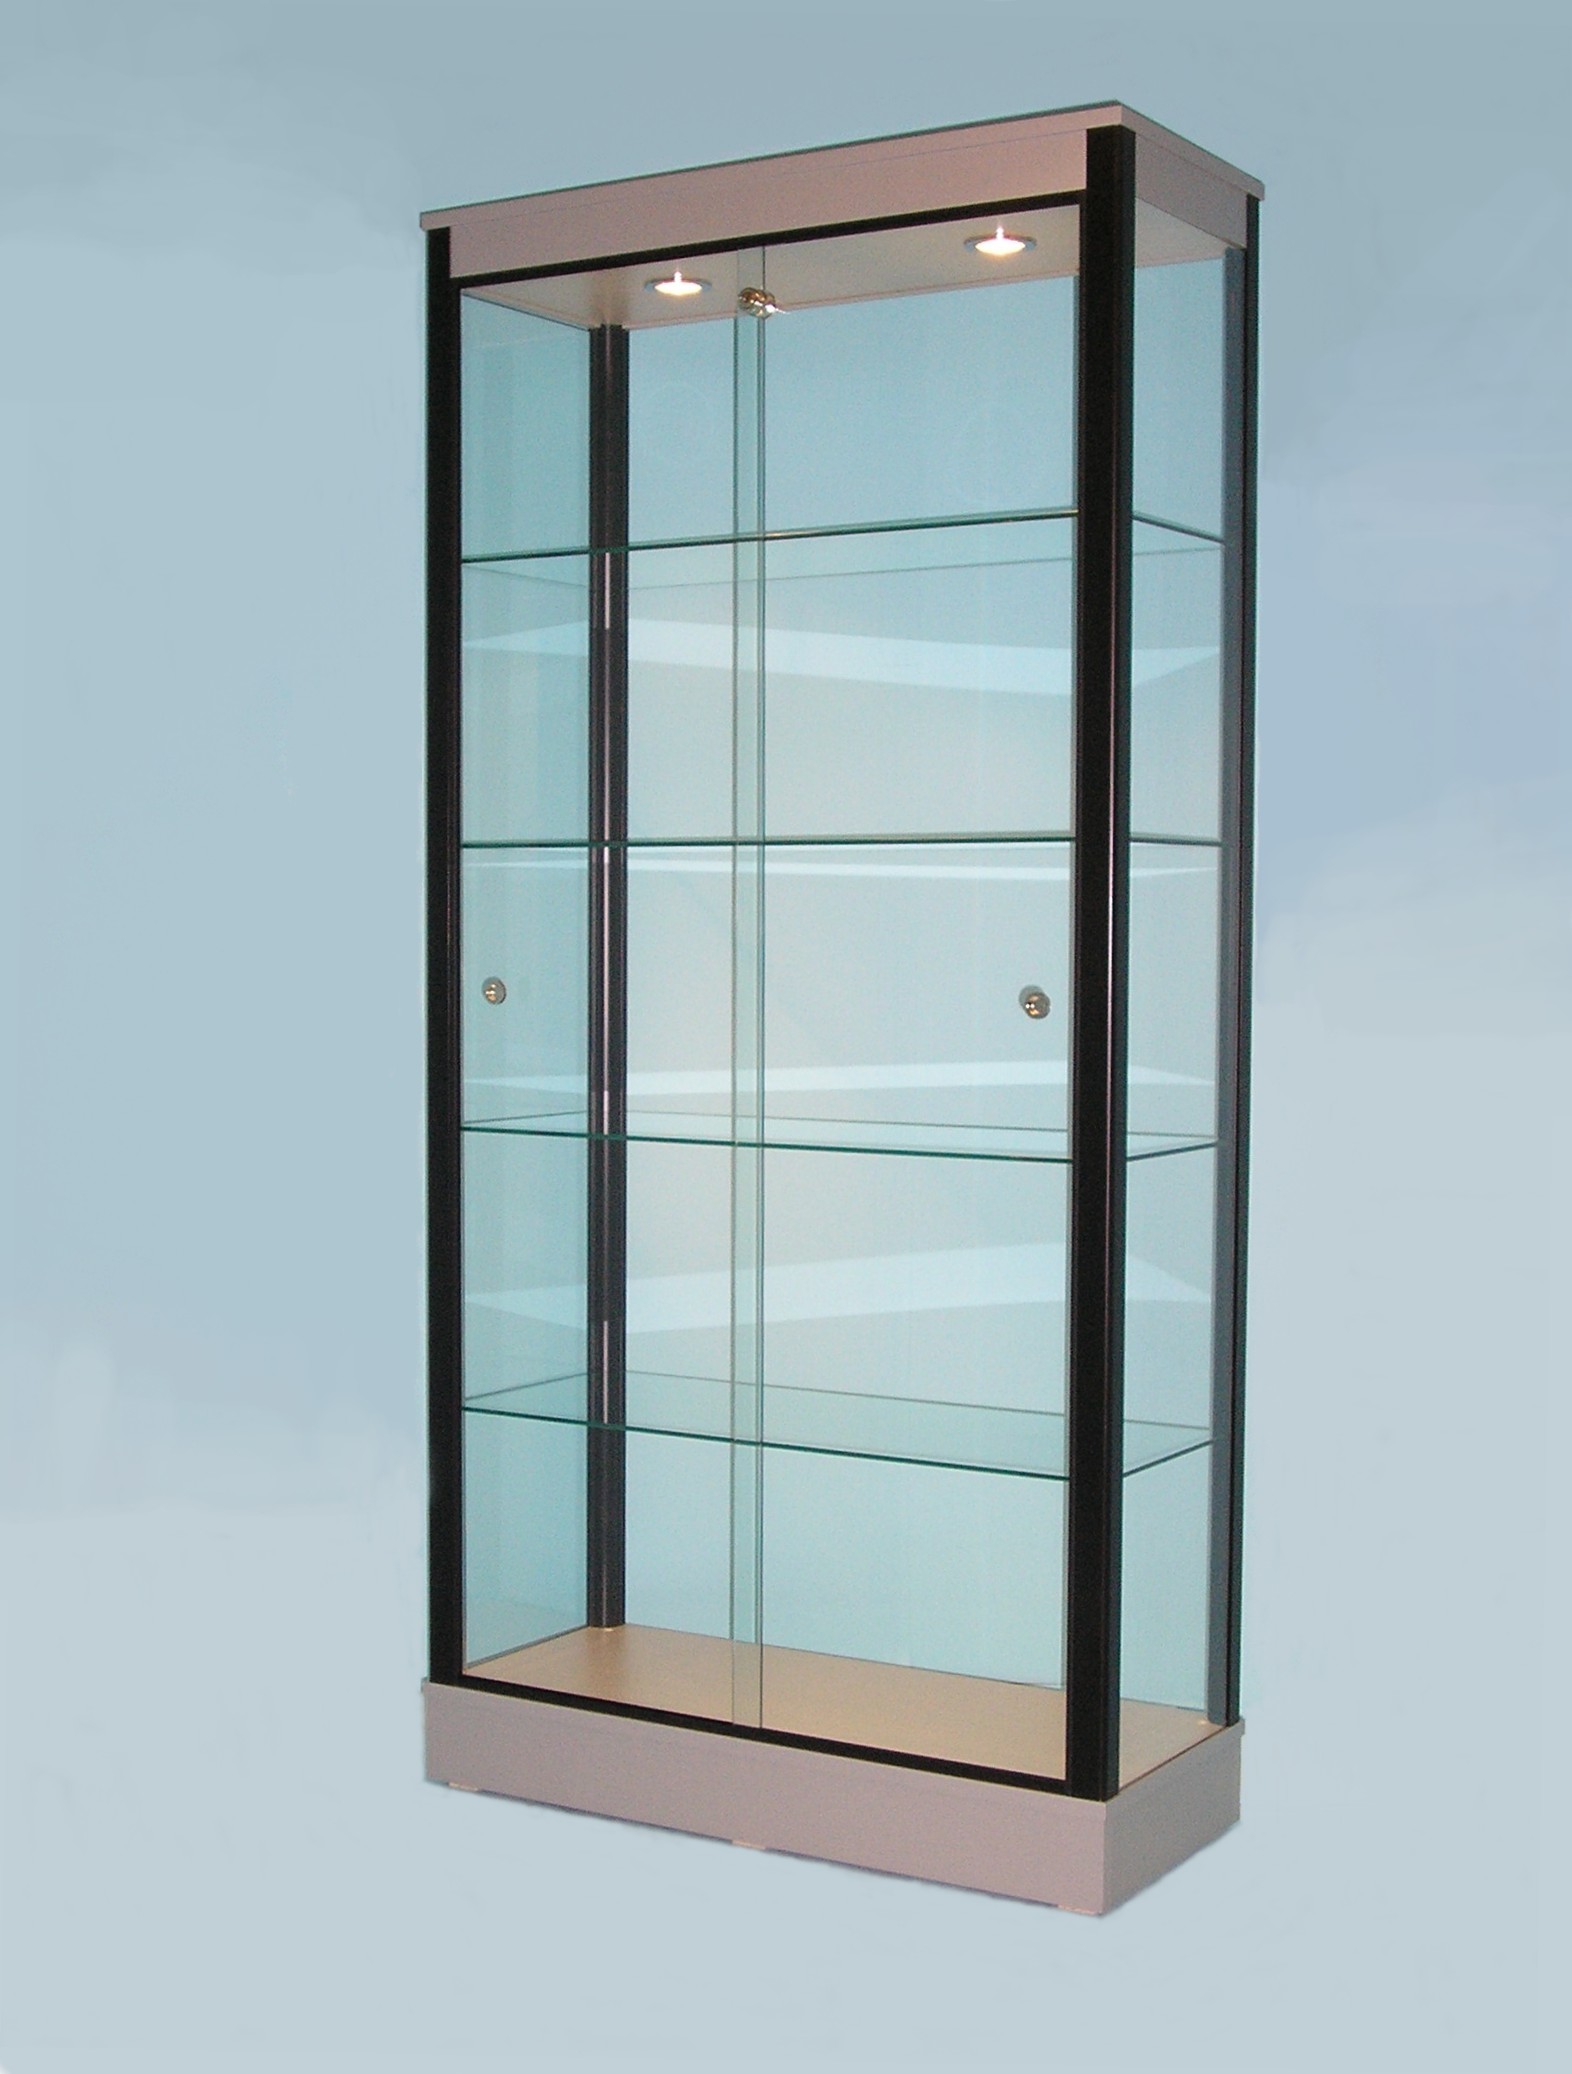 Large Glass Display Cabinets - Designex Cabinets